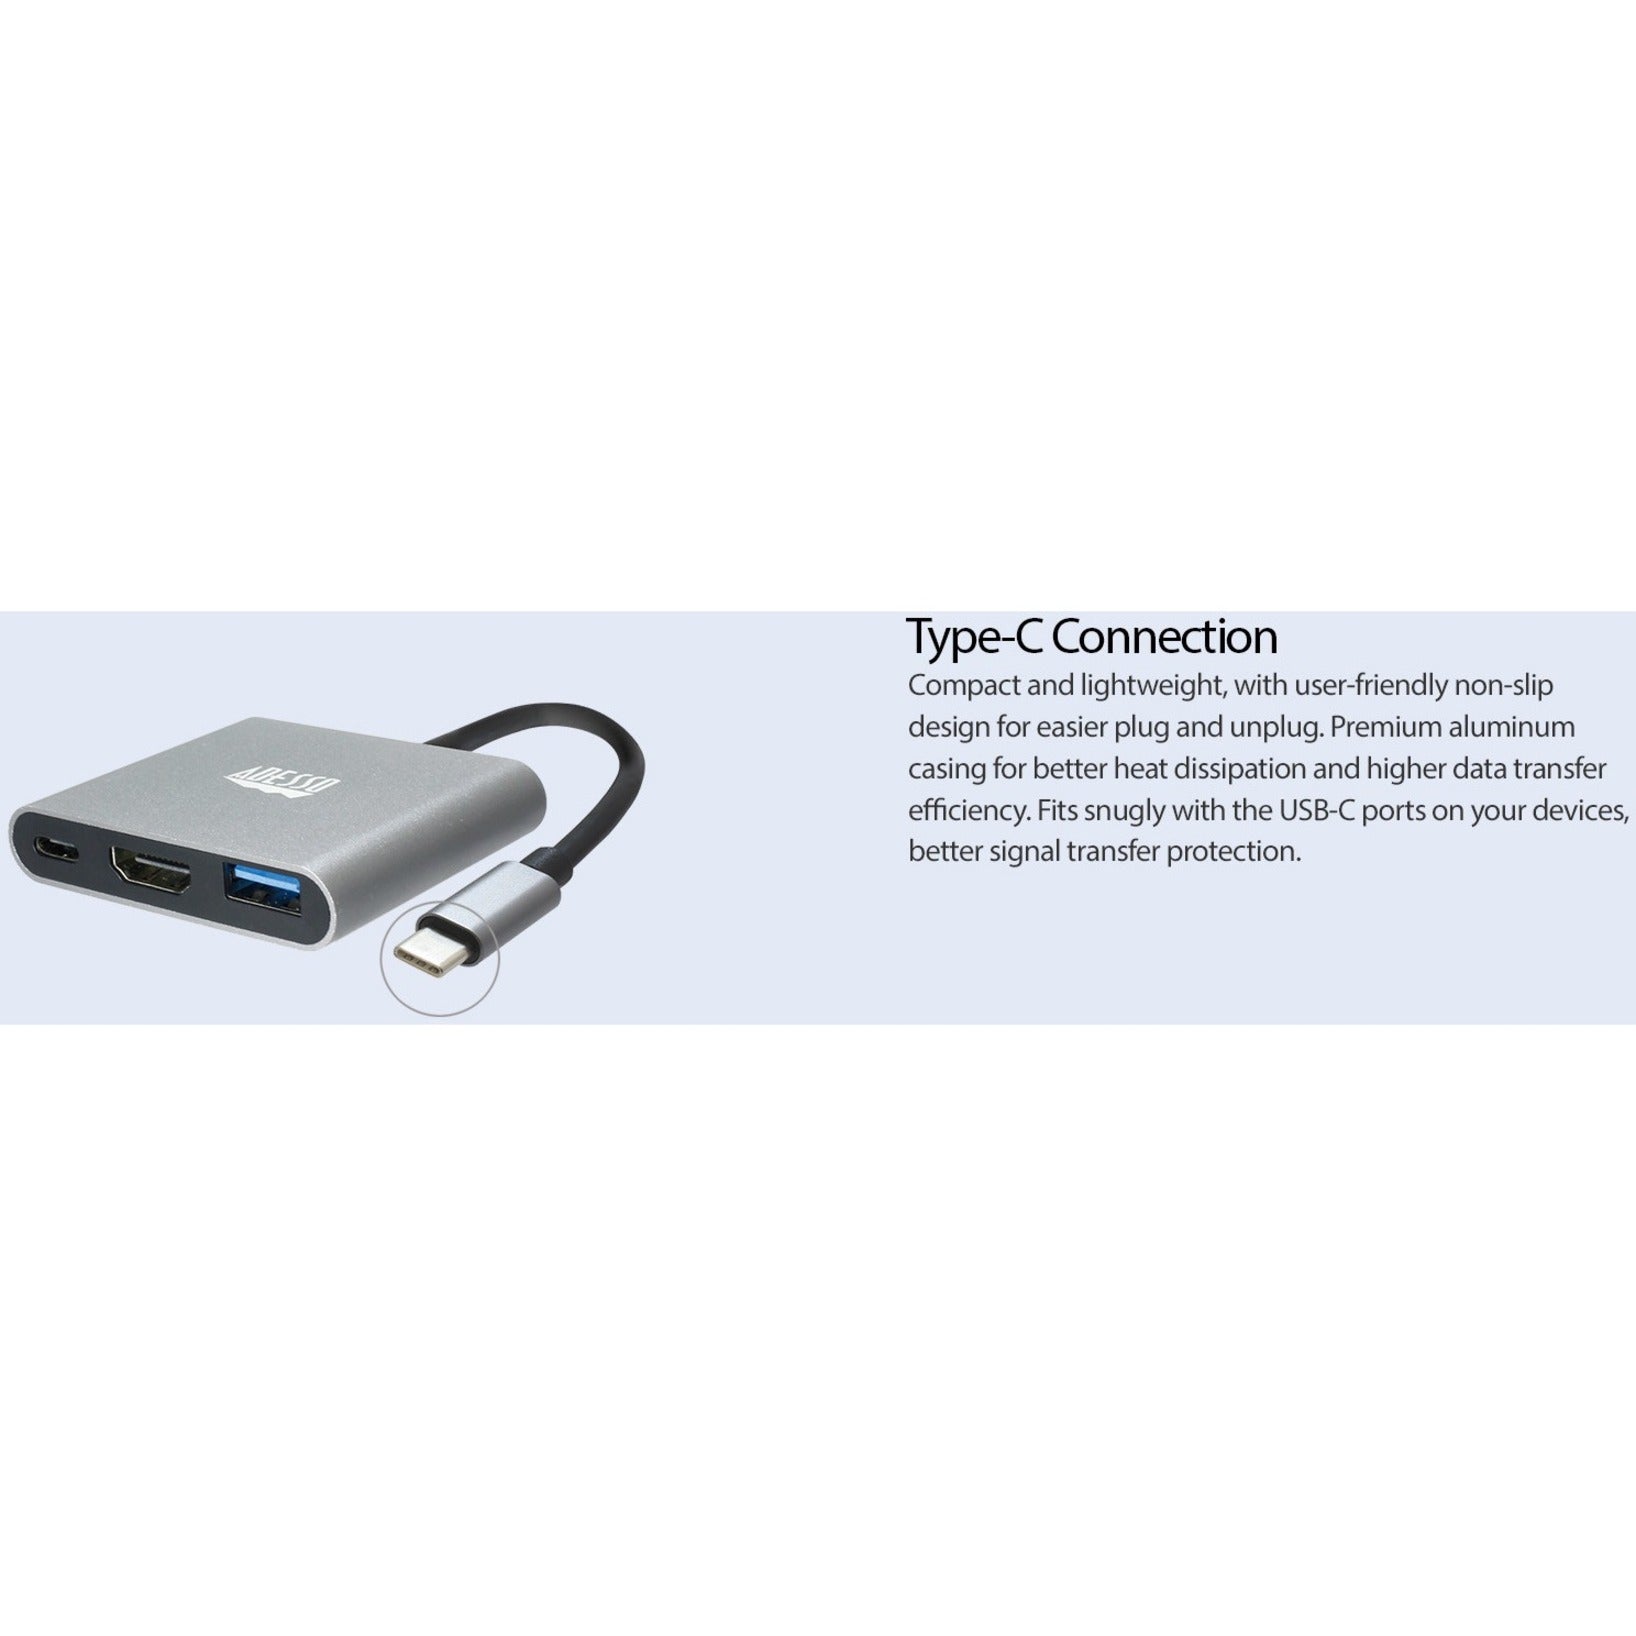 Adesso AUH-4010 3-IN-1 USB-C Multi-Port Docking Station, TAA Compliant, HDMI, USB Type-A, USB Type-C, Thunderbolt, 60W Power Supply